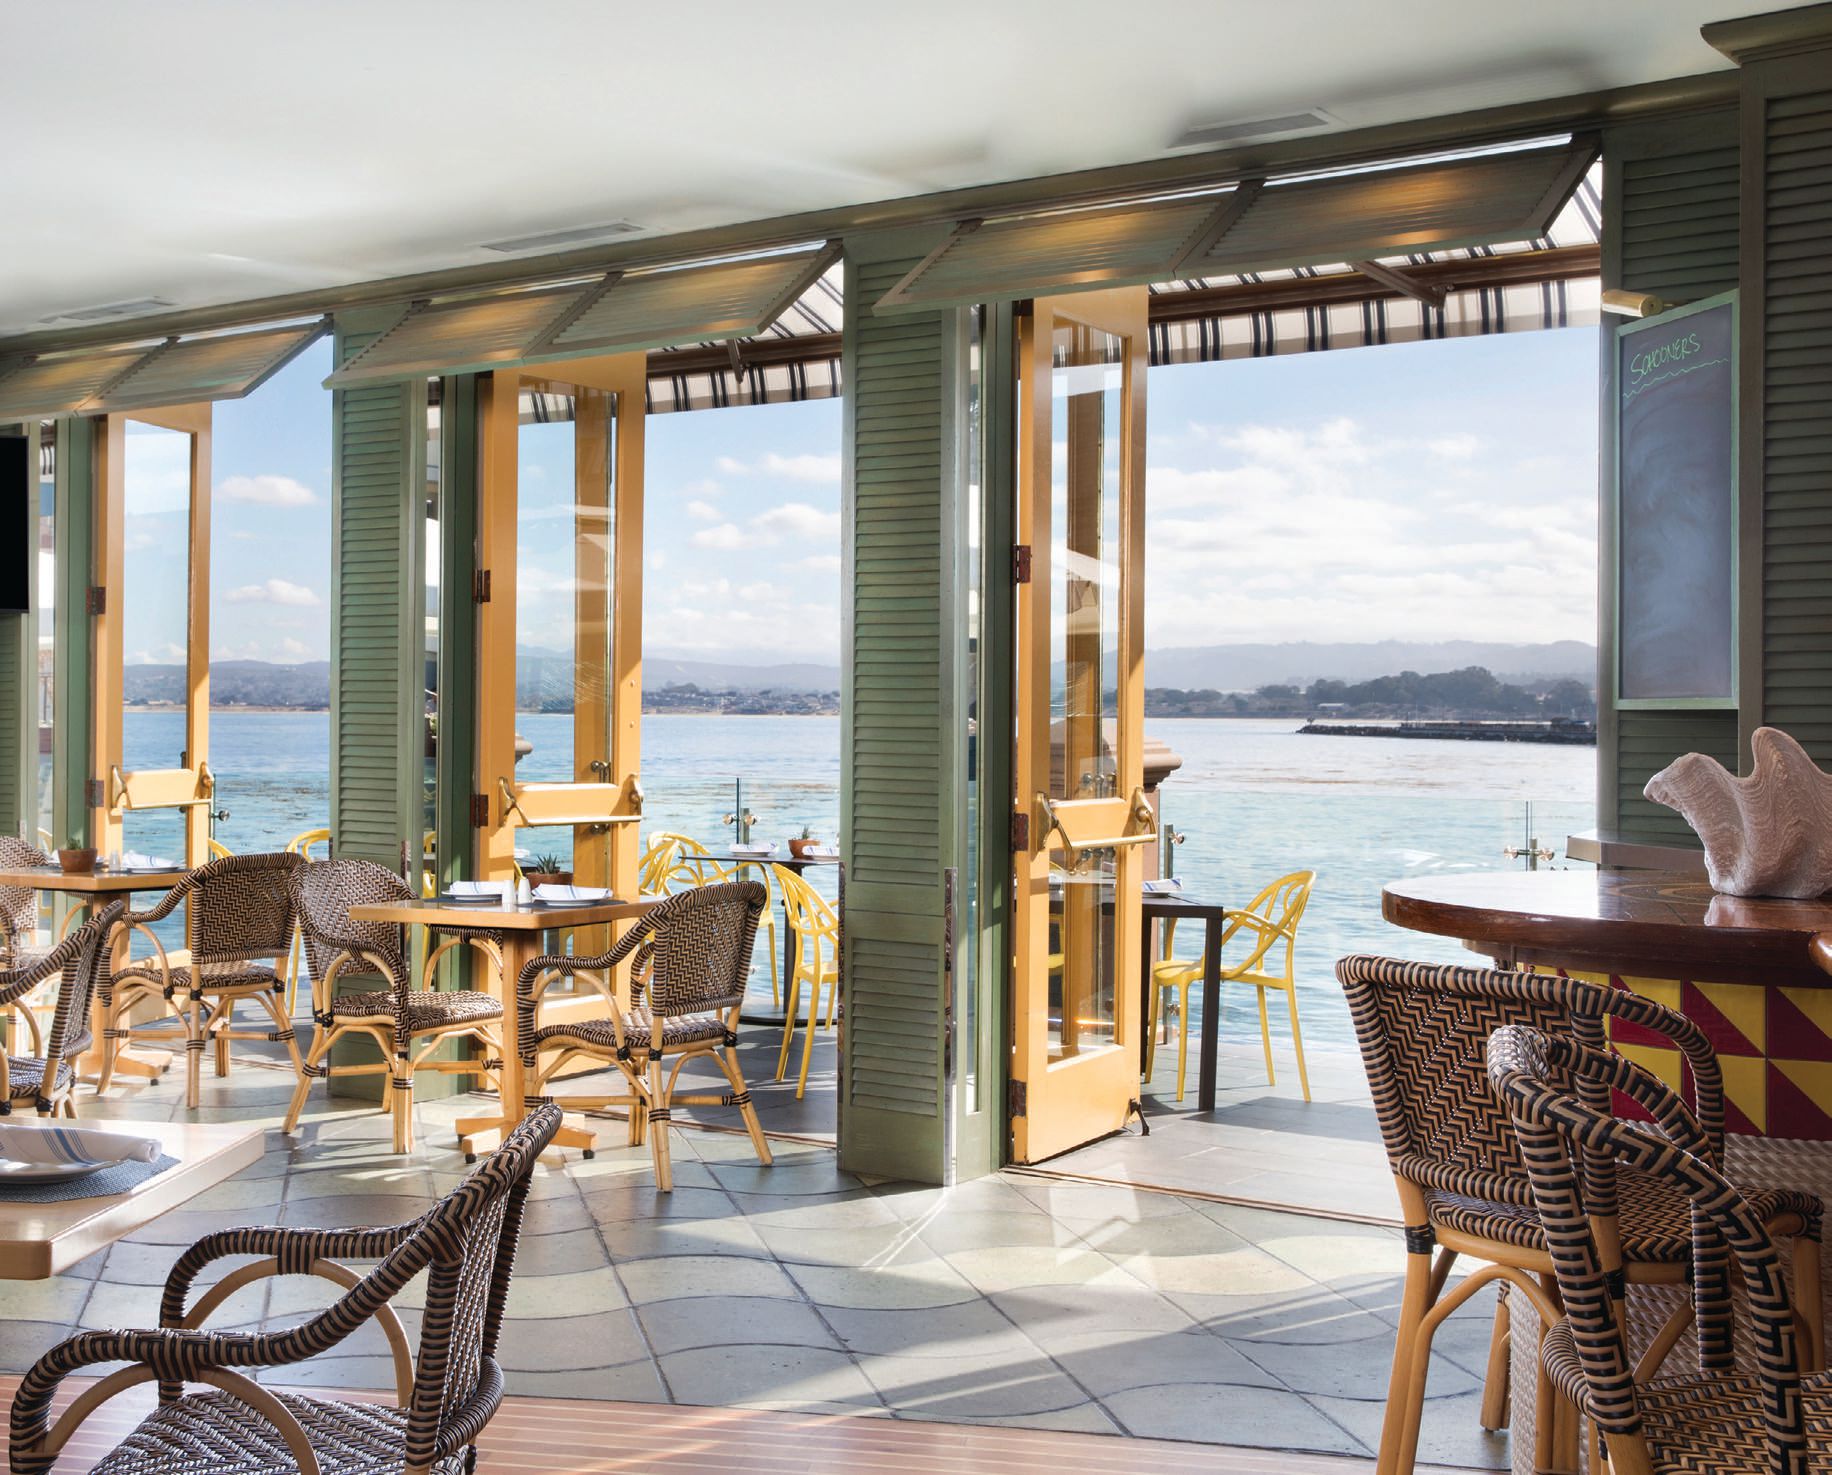 The dining room views at Coastal Kitchen. PHOTO COURTESY OF MONTEREY PLAZA HOTEL AND SPA